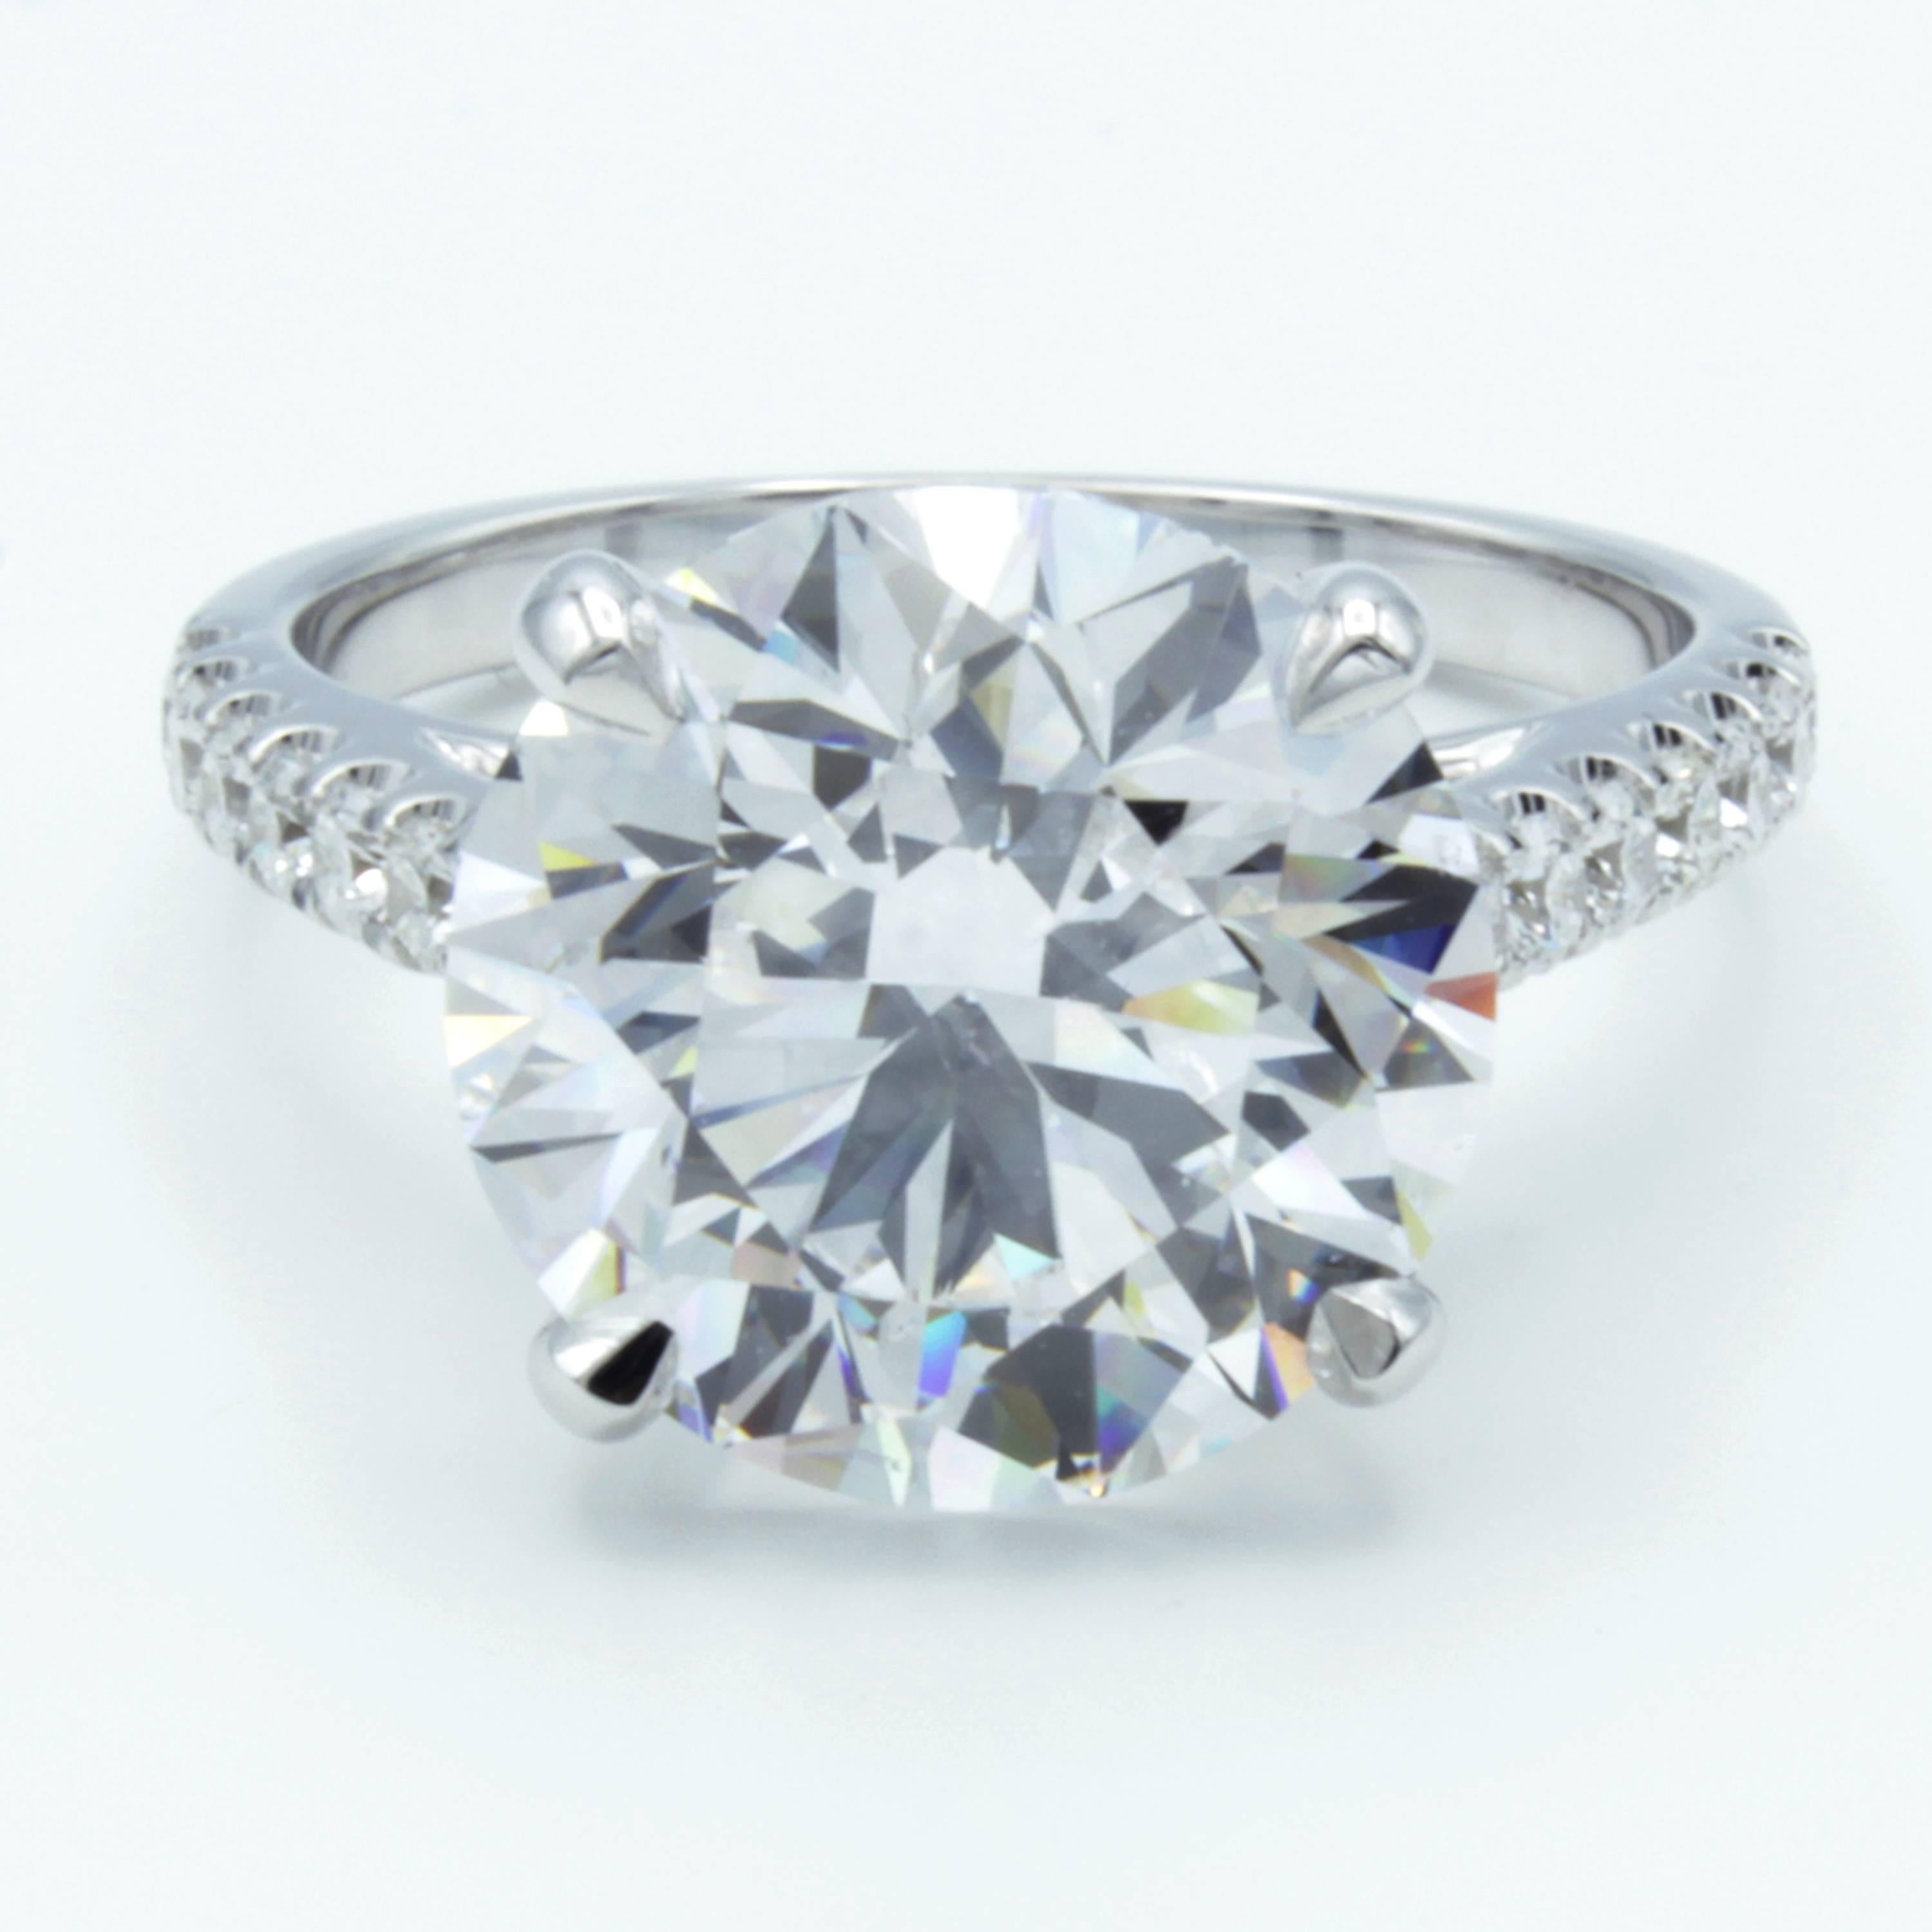 A classic Rosenberg Diamonds & Co. engagement ring shows a traditional design featuring a GIA certified 6.00 carat round brilliant diamond upon a band of bright 18K white gold. An elegant setting carries pave set diamond accents halfway around the